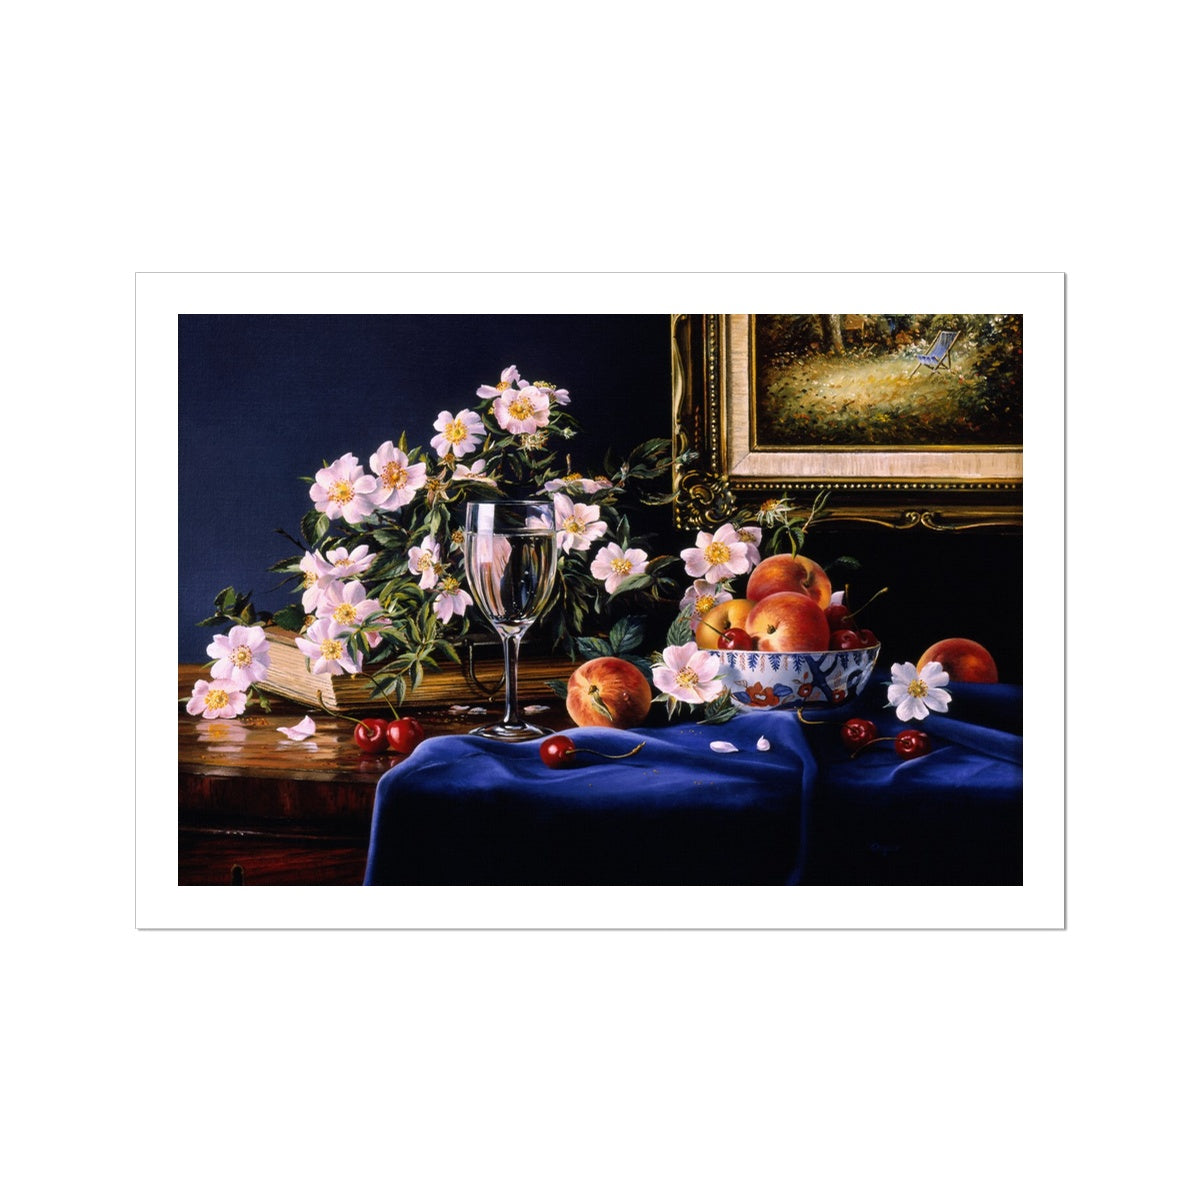 Ted Dyer Fine Art Print. Open Edition Cornish Art Print. &#39;Dog Roses and Peaches Still Life&#39;. Cornwall Art Gallery